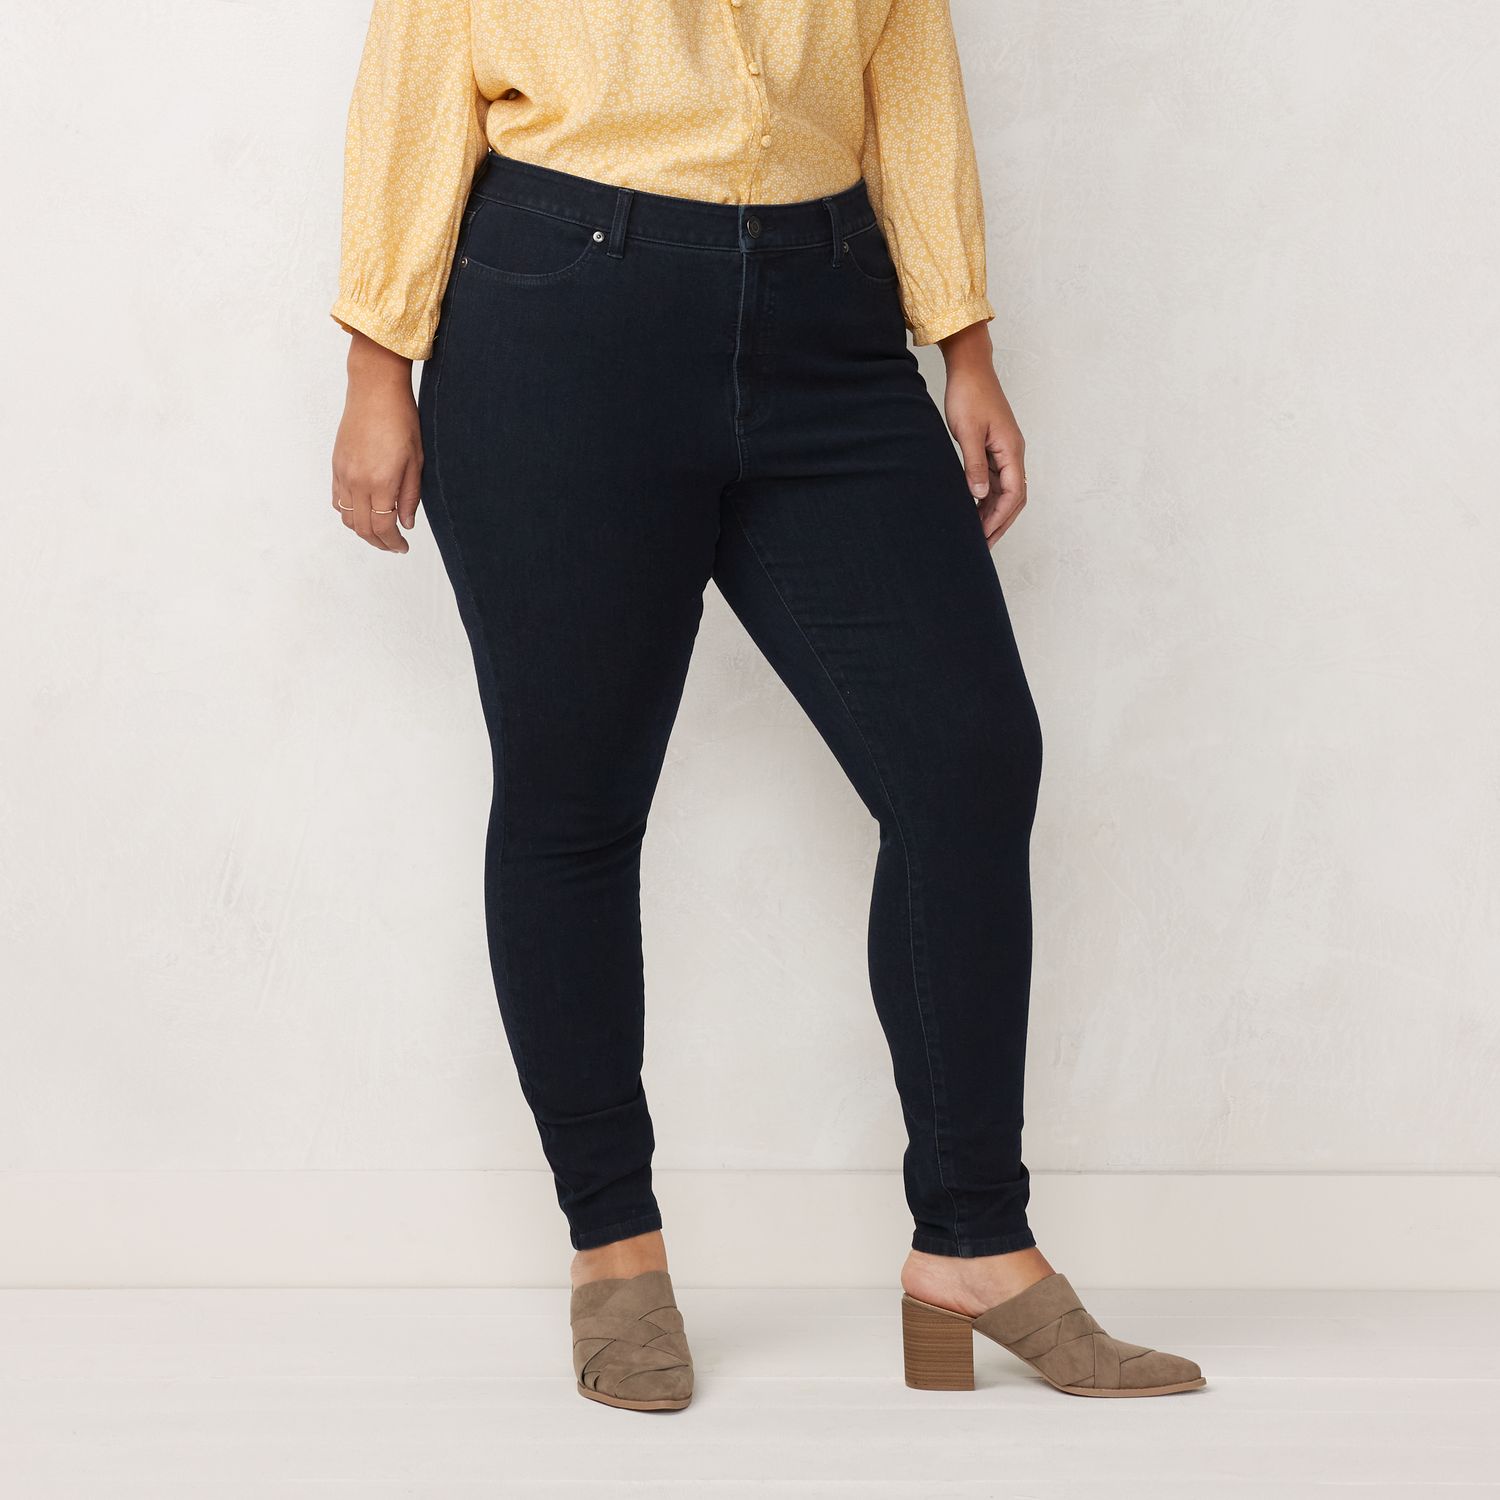 Image for LC Lauren Conrad Plus Size Mid-Rise Super Skinny Jeans at Kohl's.